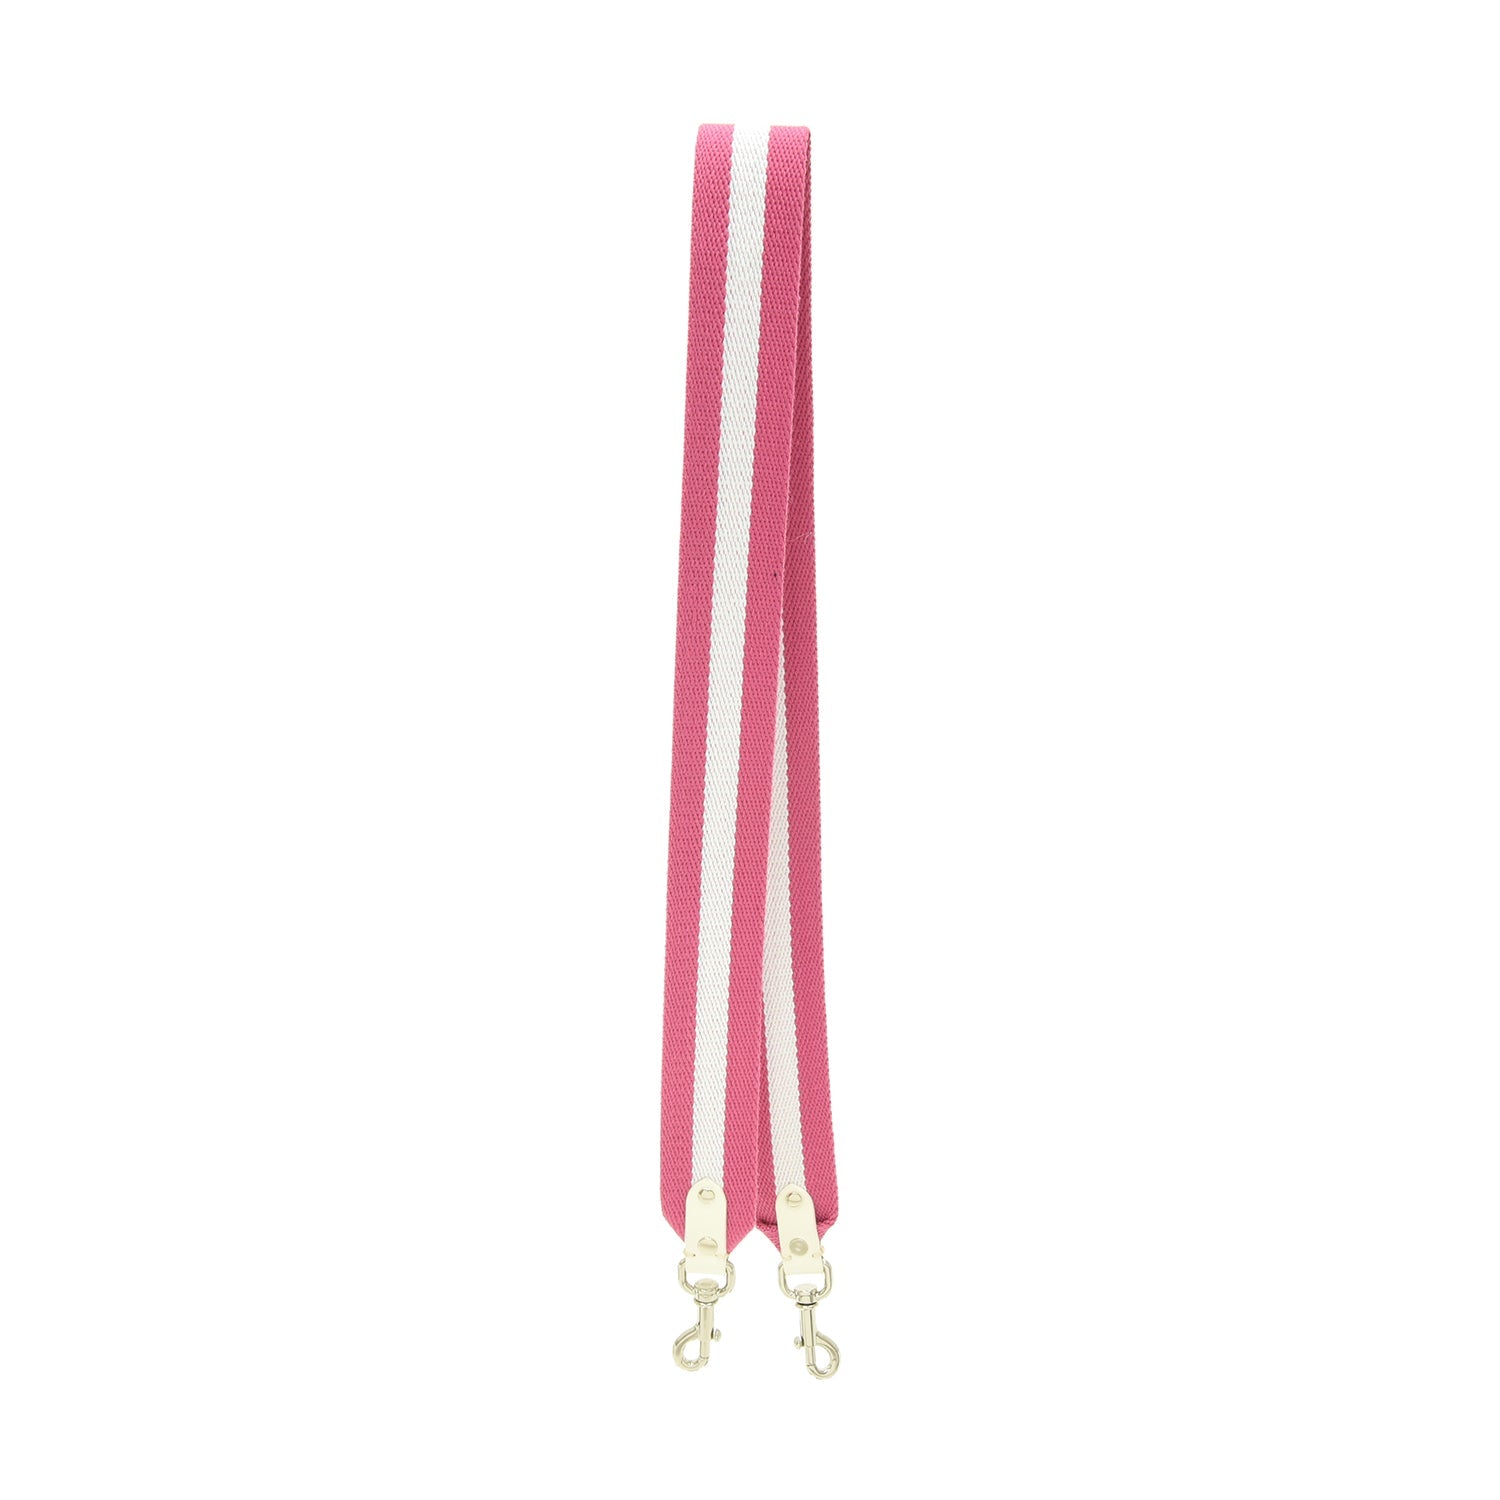 The London Square Collection · Shoulder Strap | Pink/White - GLOBE-TROTTER